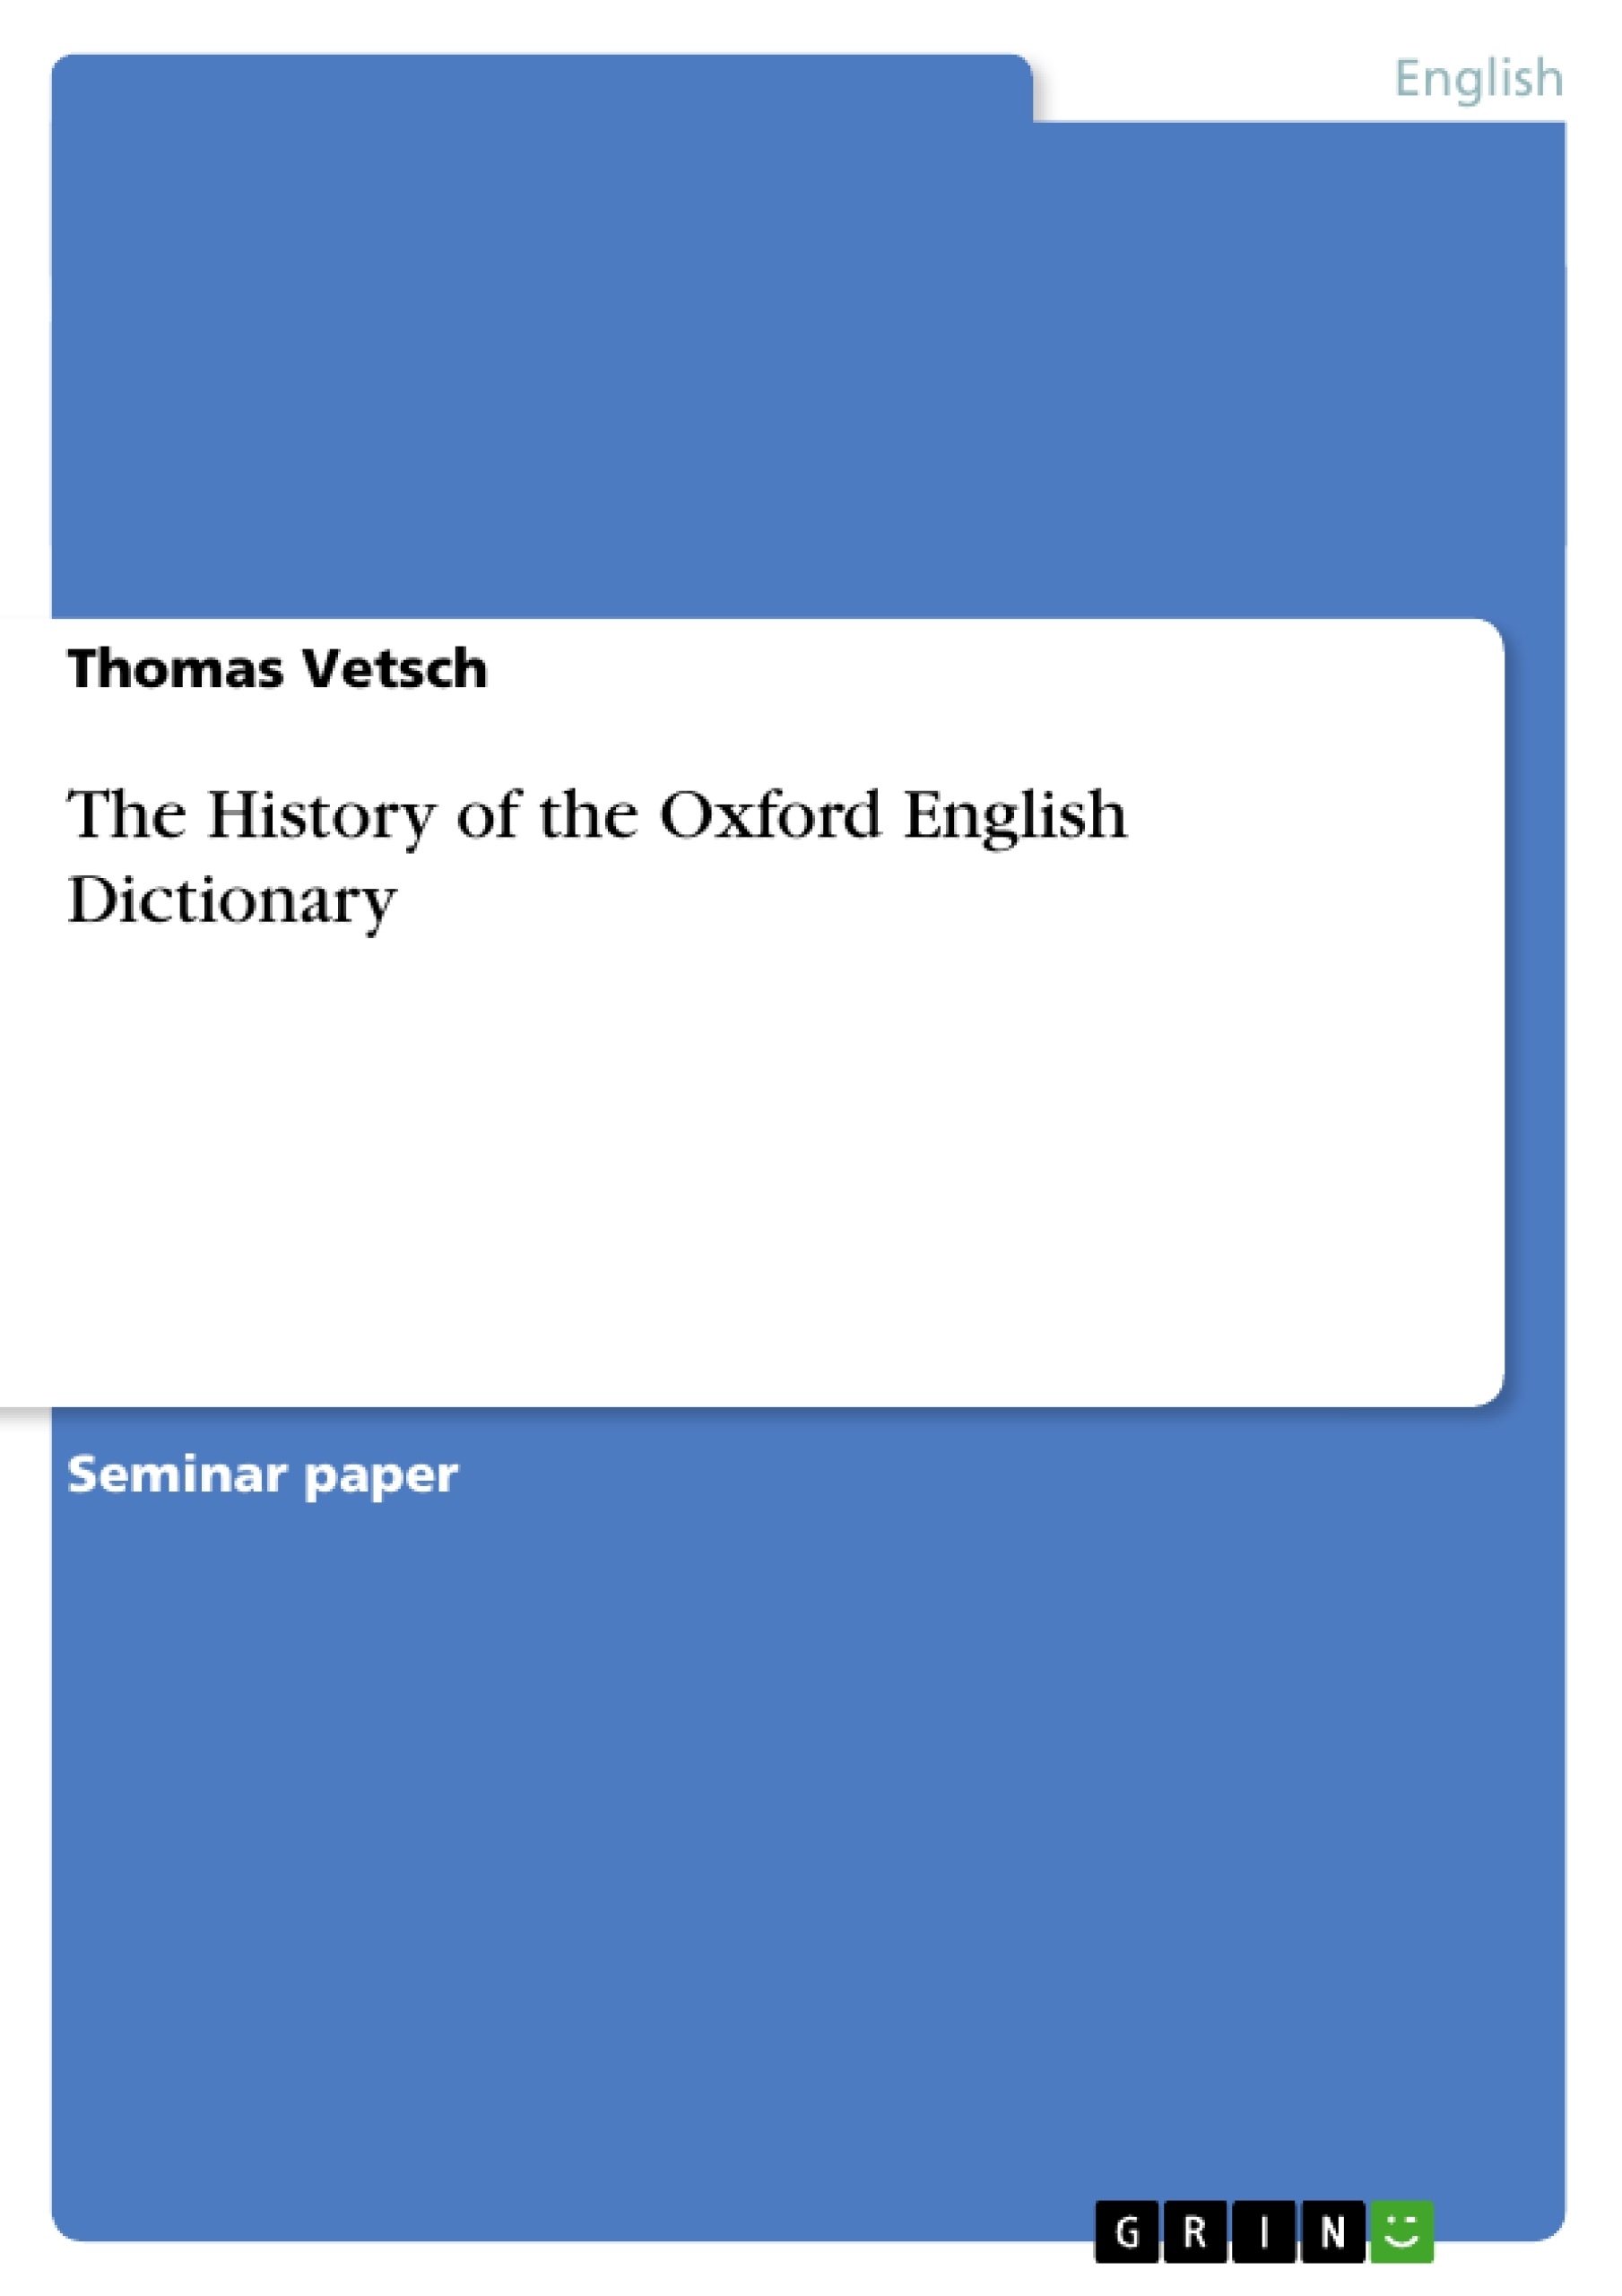 oxford english dictionary thesis